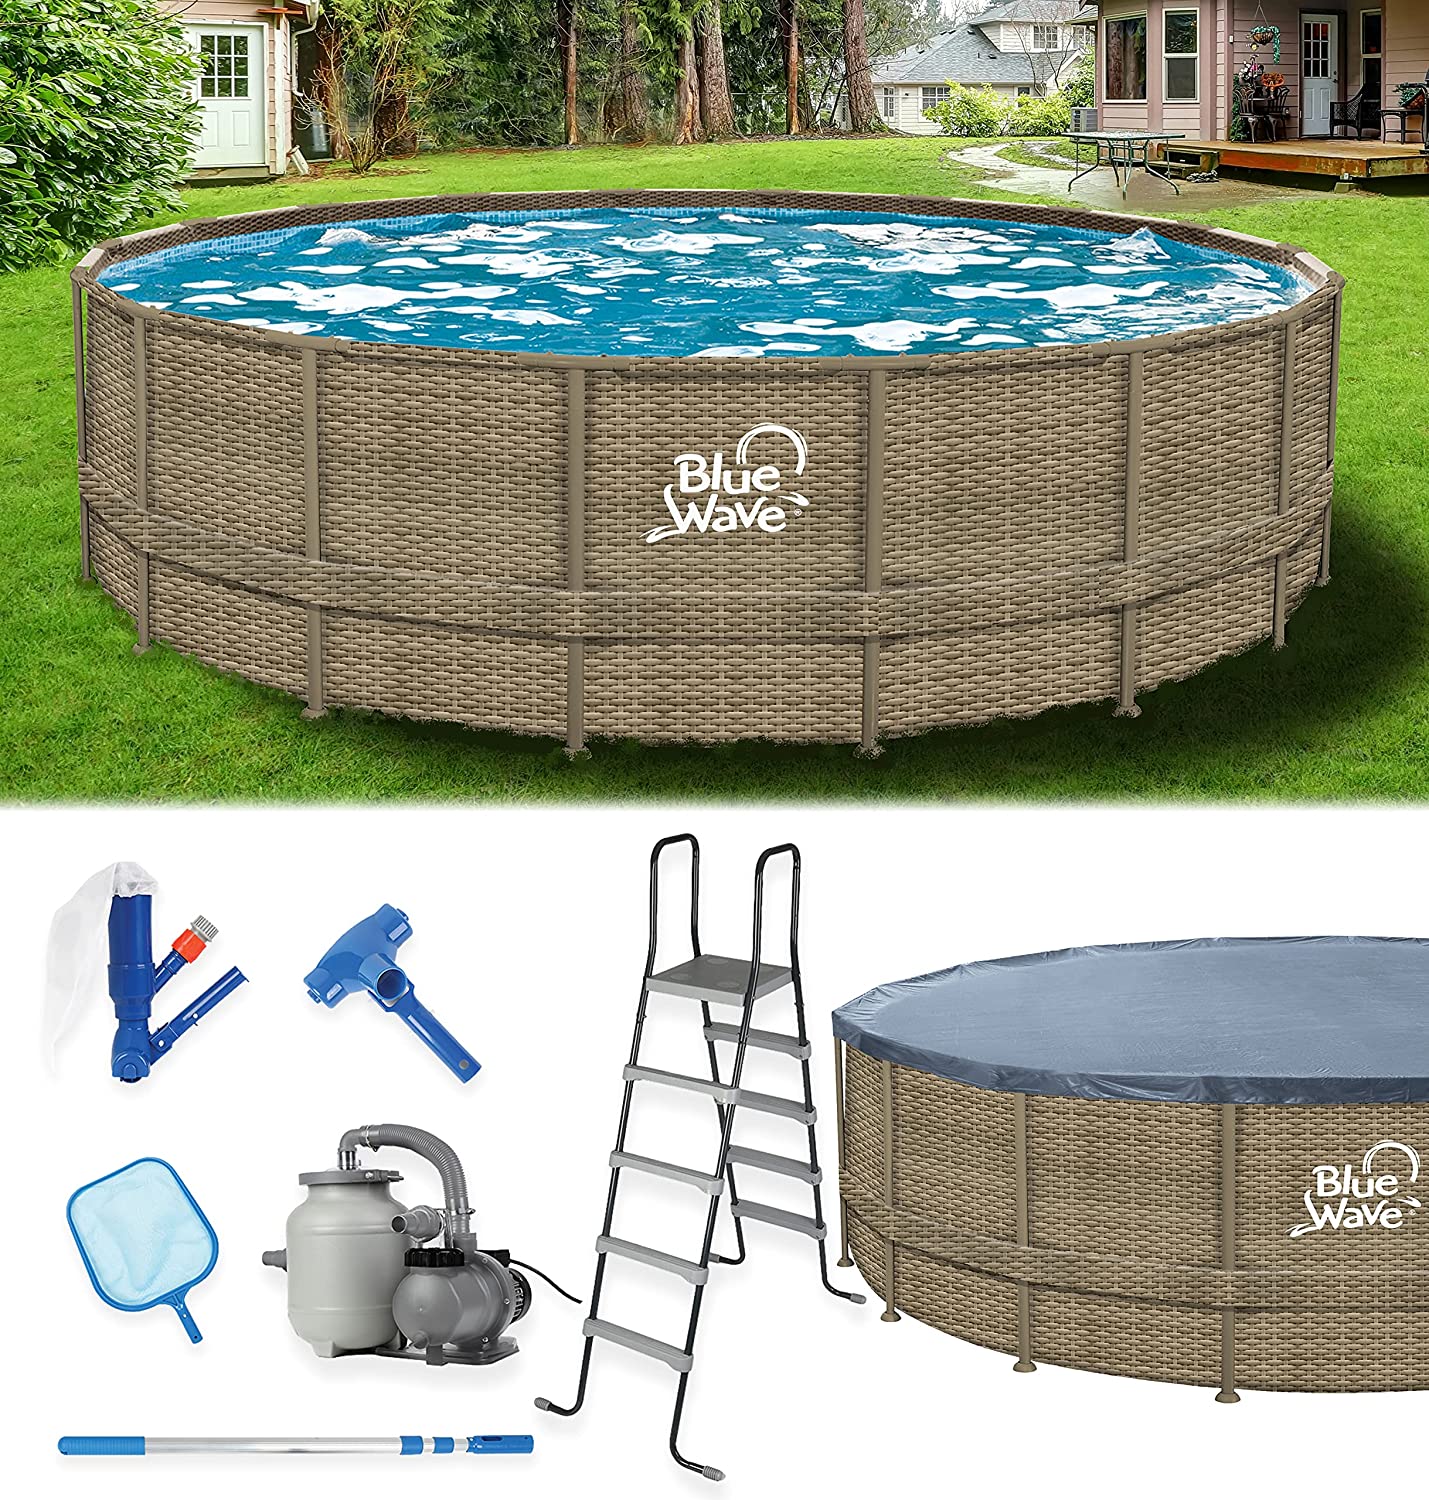 Blue Wave NB19797 18-ft Round 52" Deep Dark Cocoa Wicker Frame Above Ground Pool w/ Cover, Brown - $724